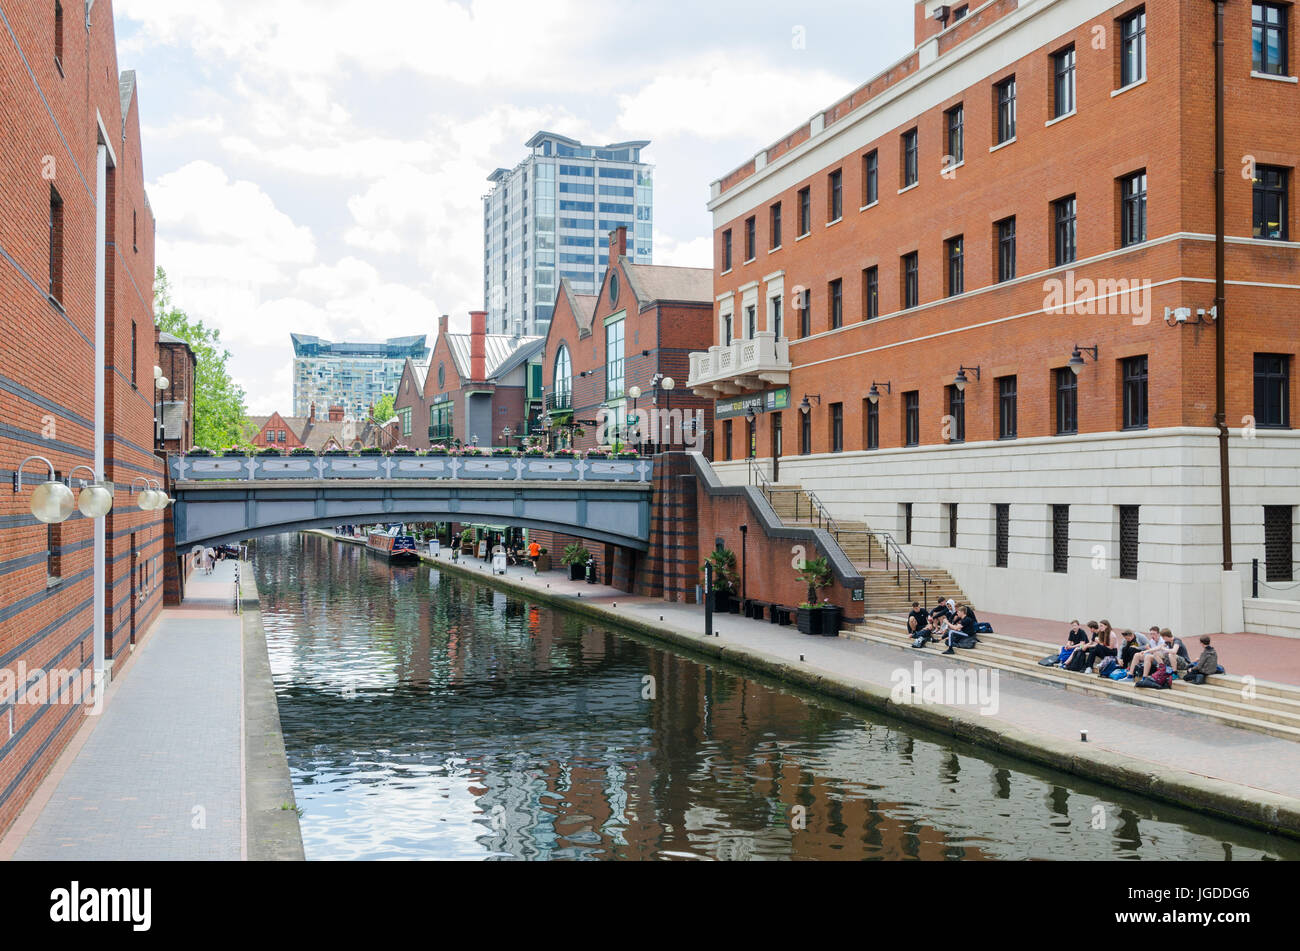 The canal running through Birmingham at Brindley Place Stock Photo